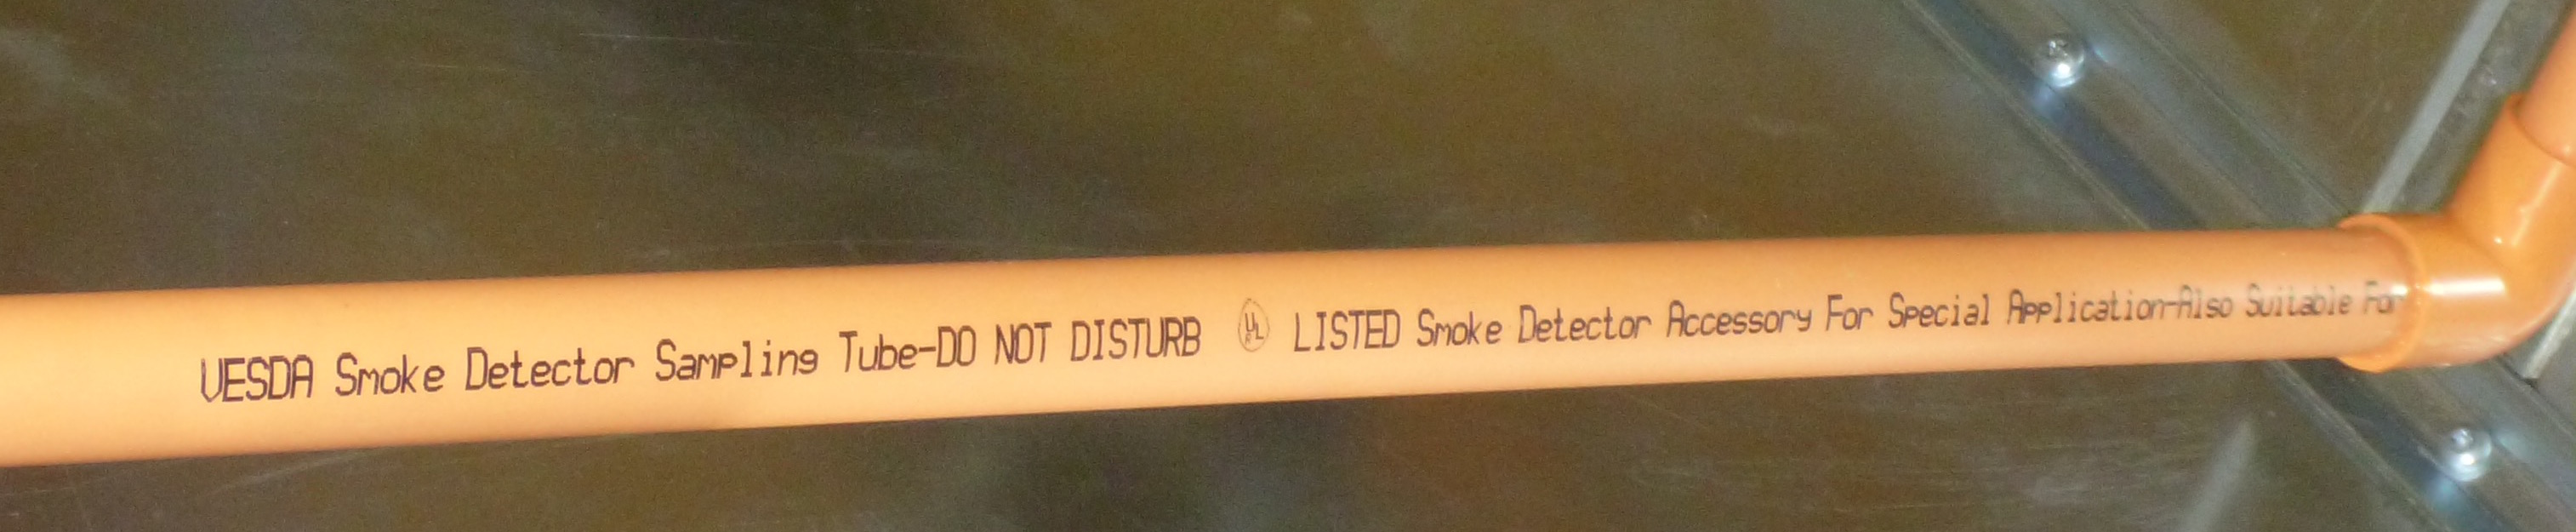 Closeup photo showing the required label on the HSSD sampling pipe